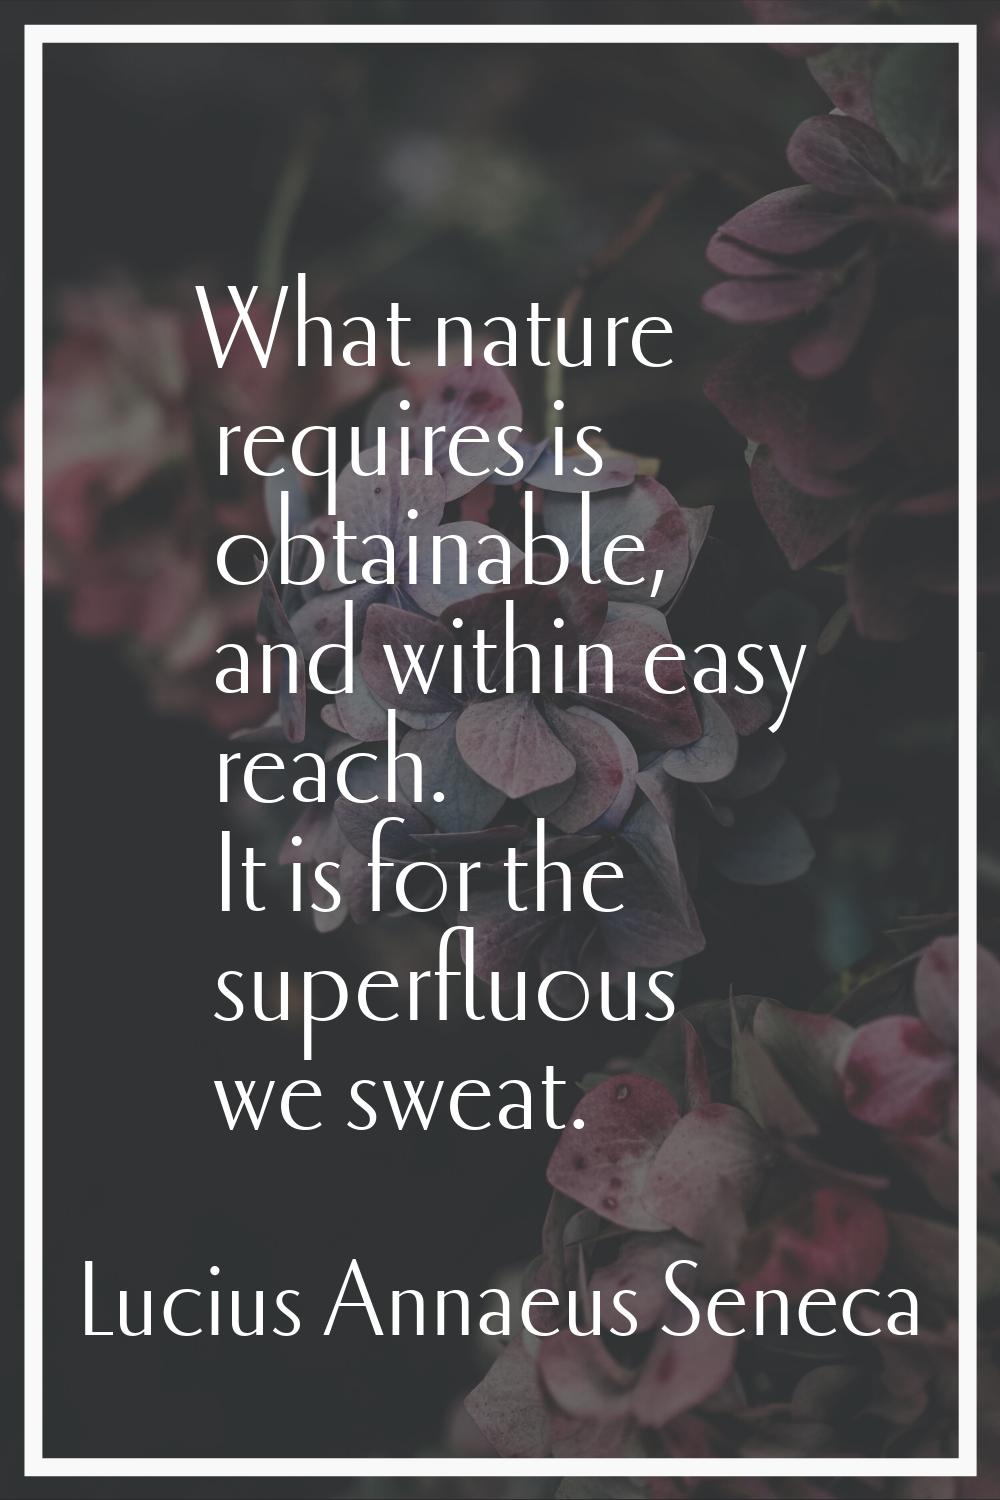 What nature requires is obtainable, and within easy reach. It is for the superfluous we sweat.